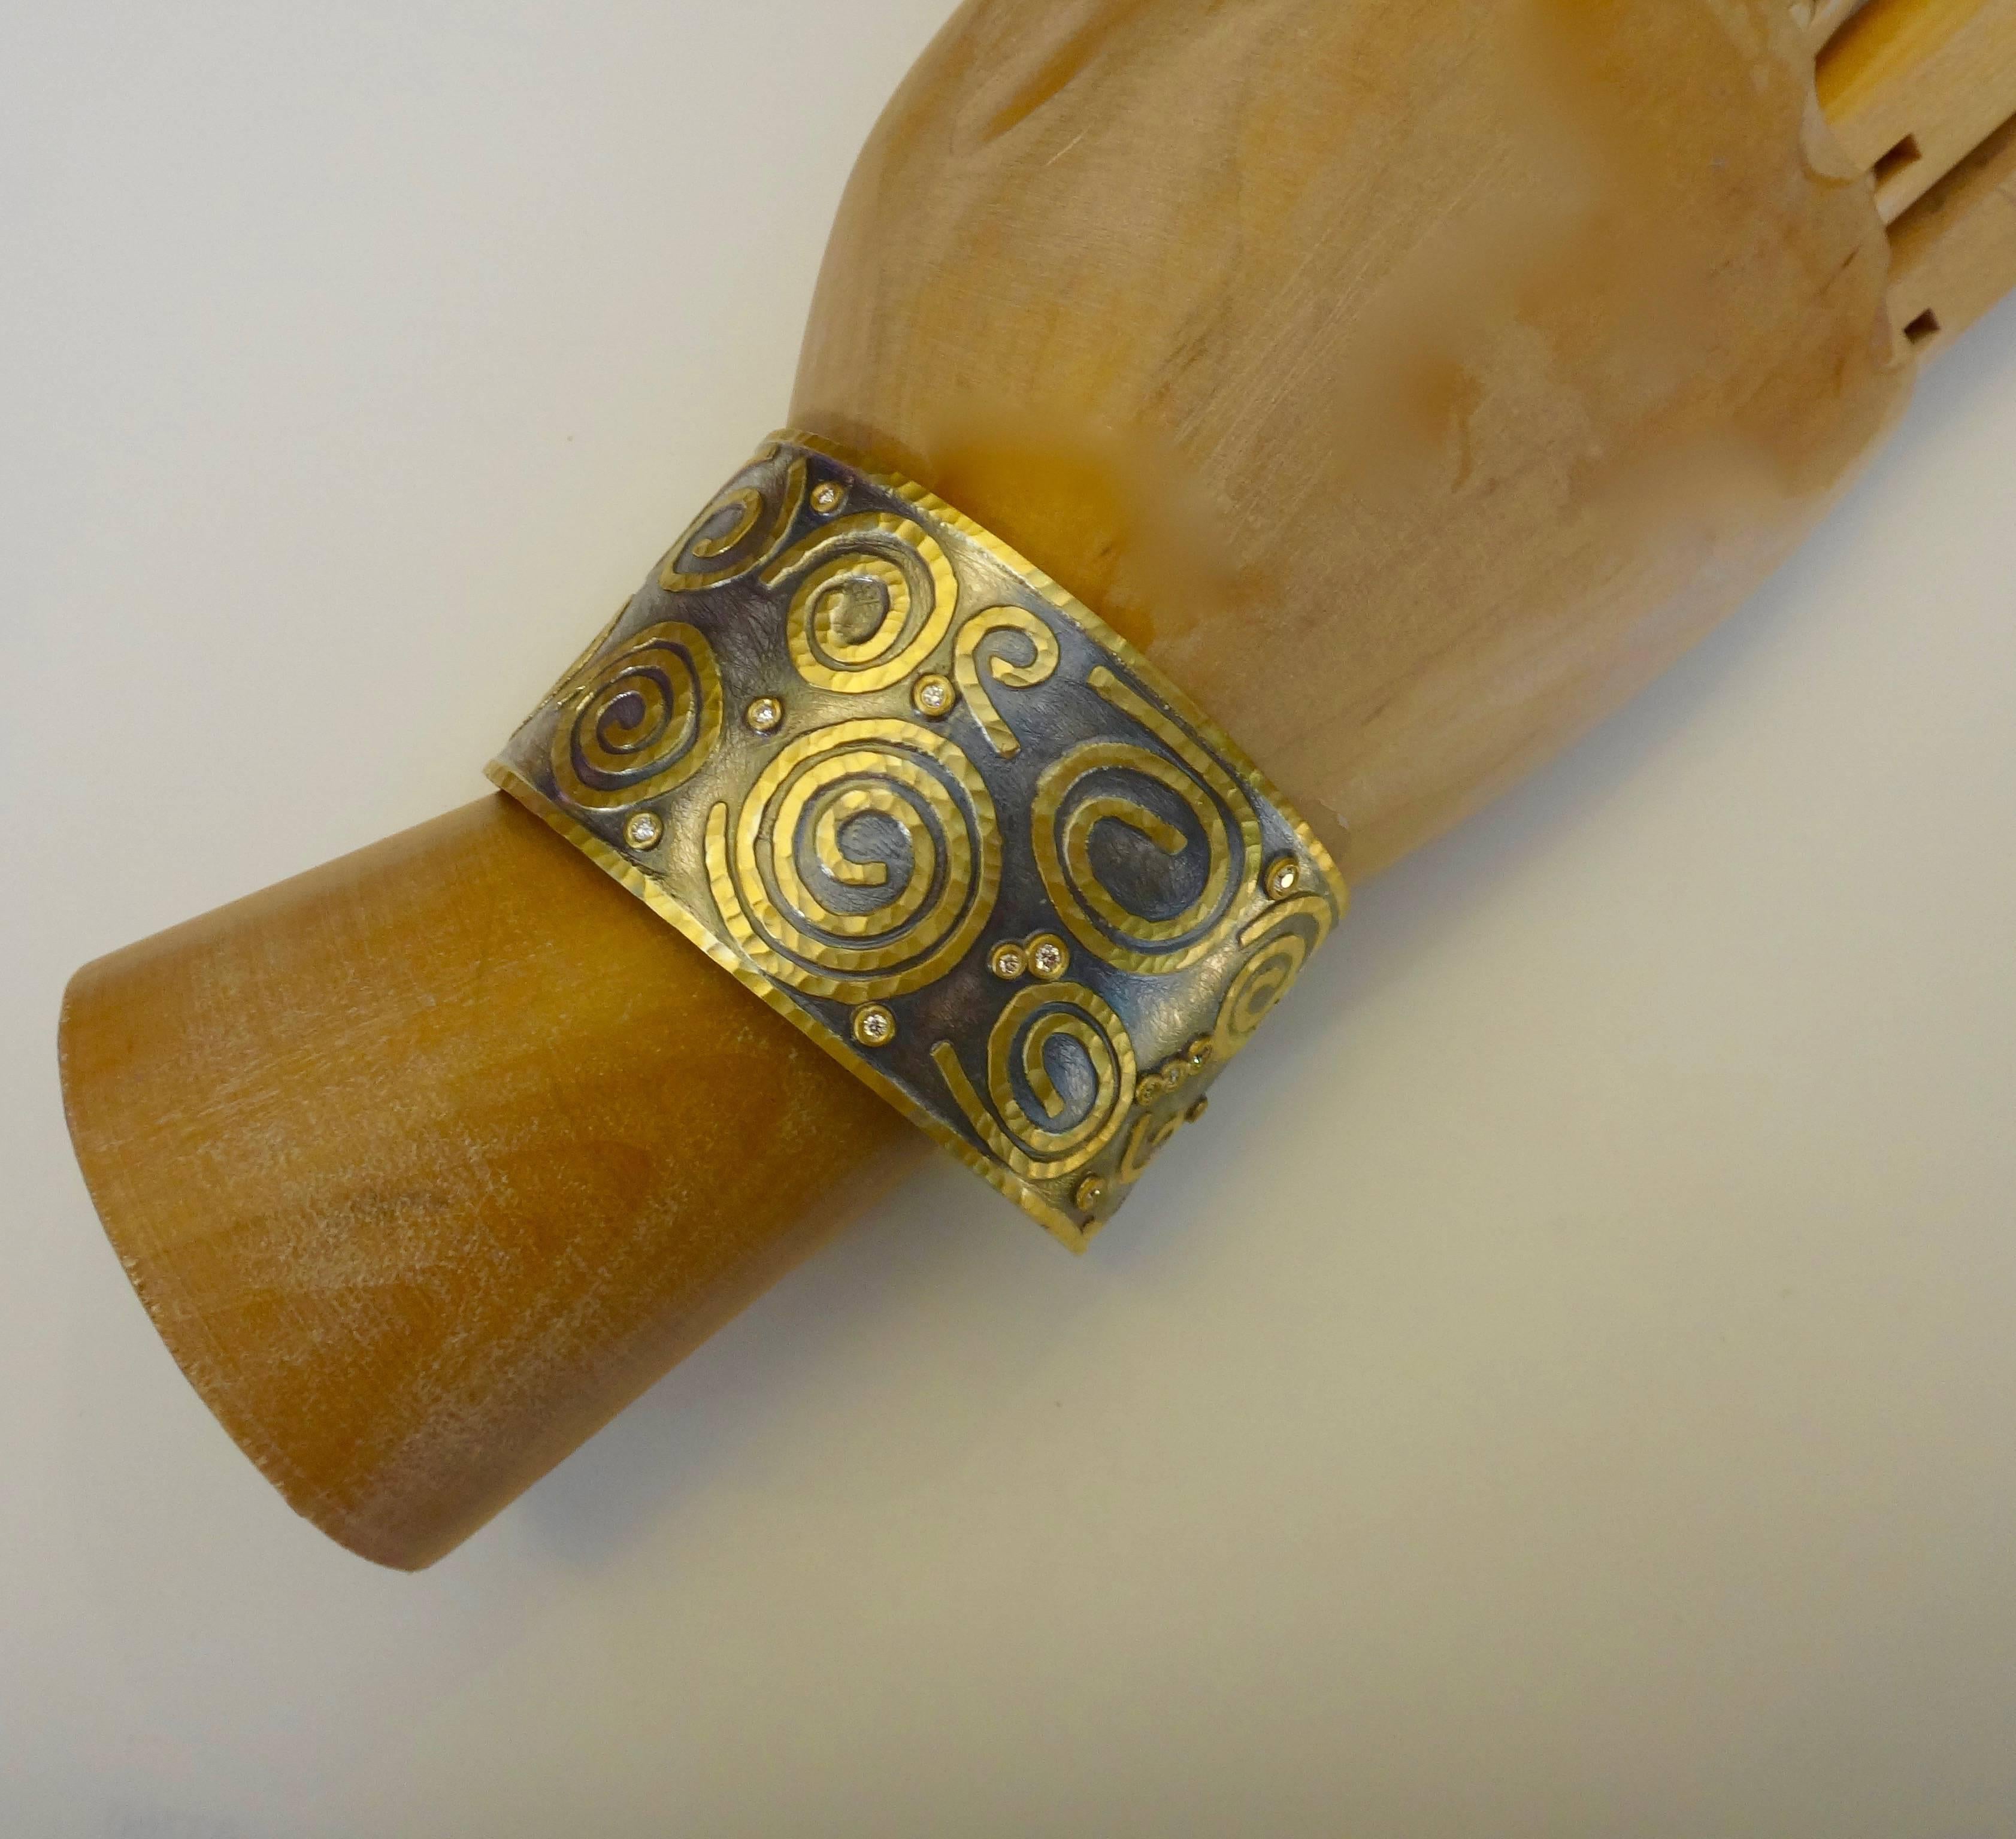 A composition of 24k gold spirals and bezel set white diamonds comprise this cuff bracelet.  The design elements are mounted on a textured and blackened sterling silver base.  This bracelet would look great with Michael Kneebone's 